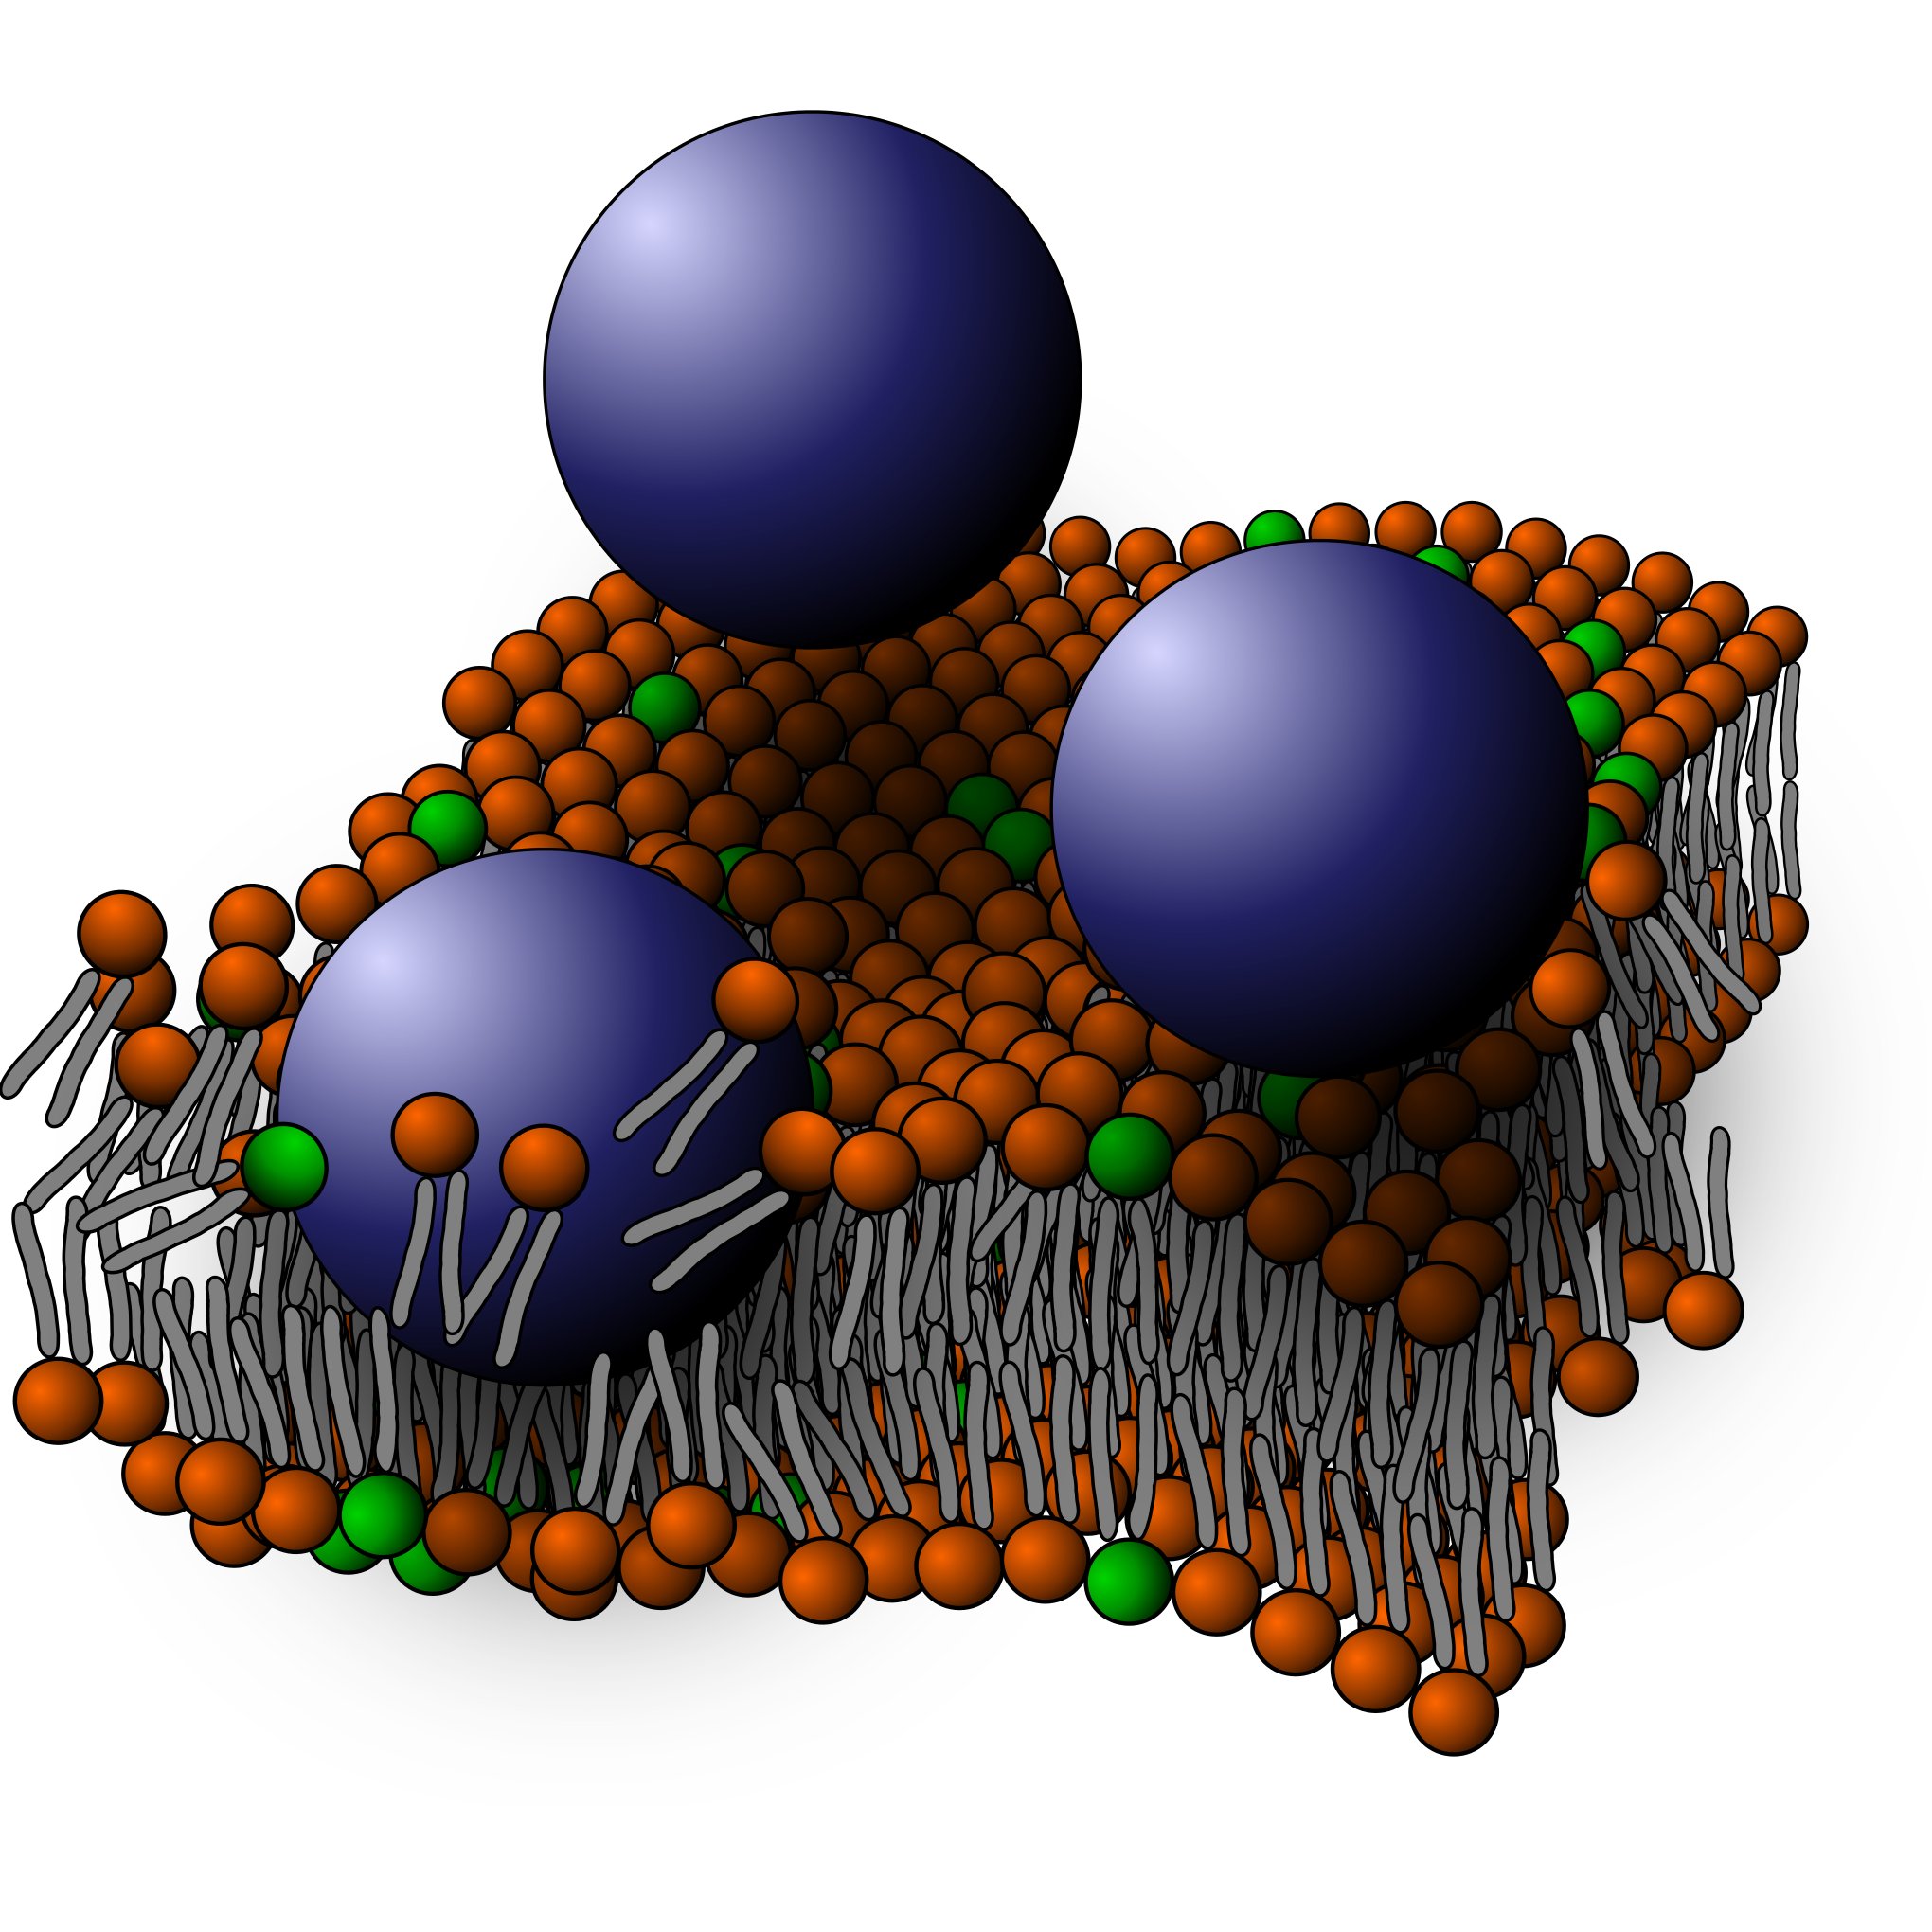 Nanoparticles disrupting a supported lipid bilayer